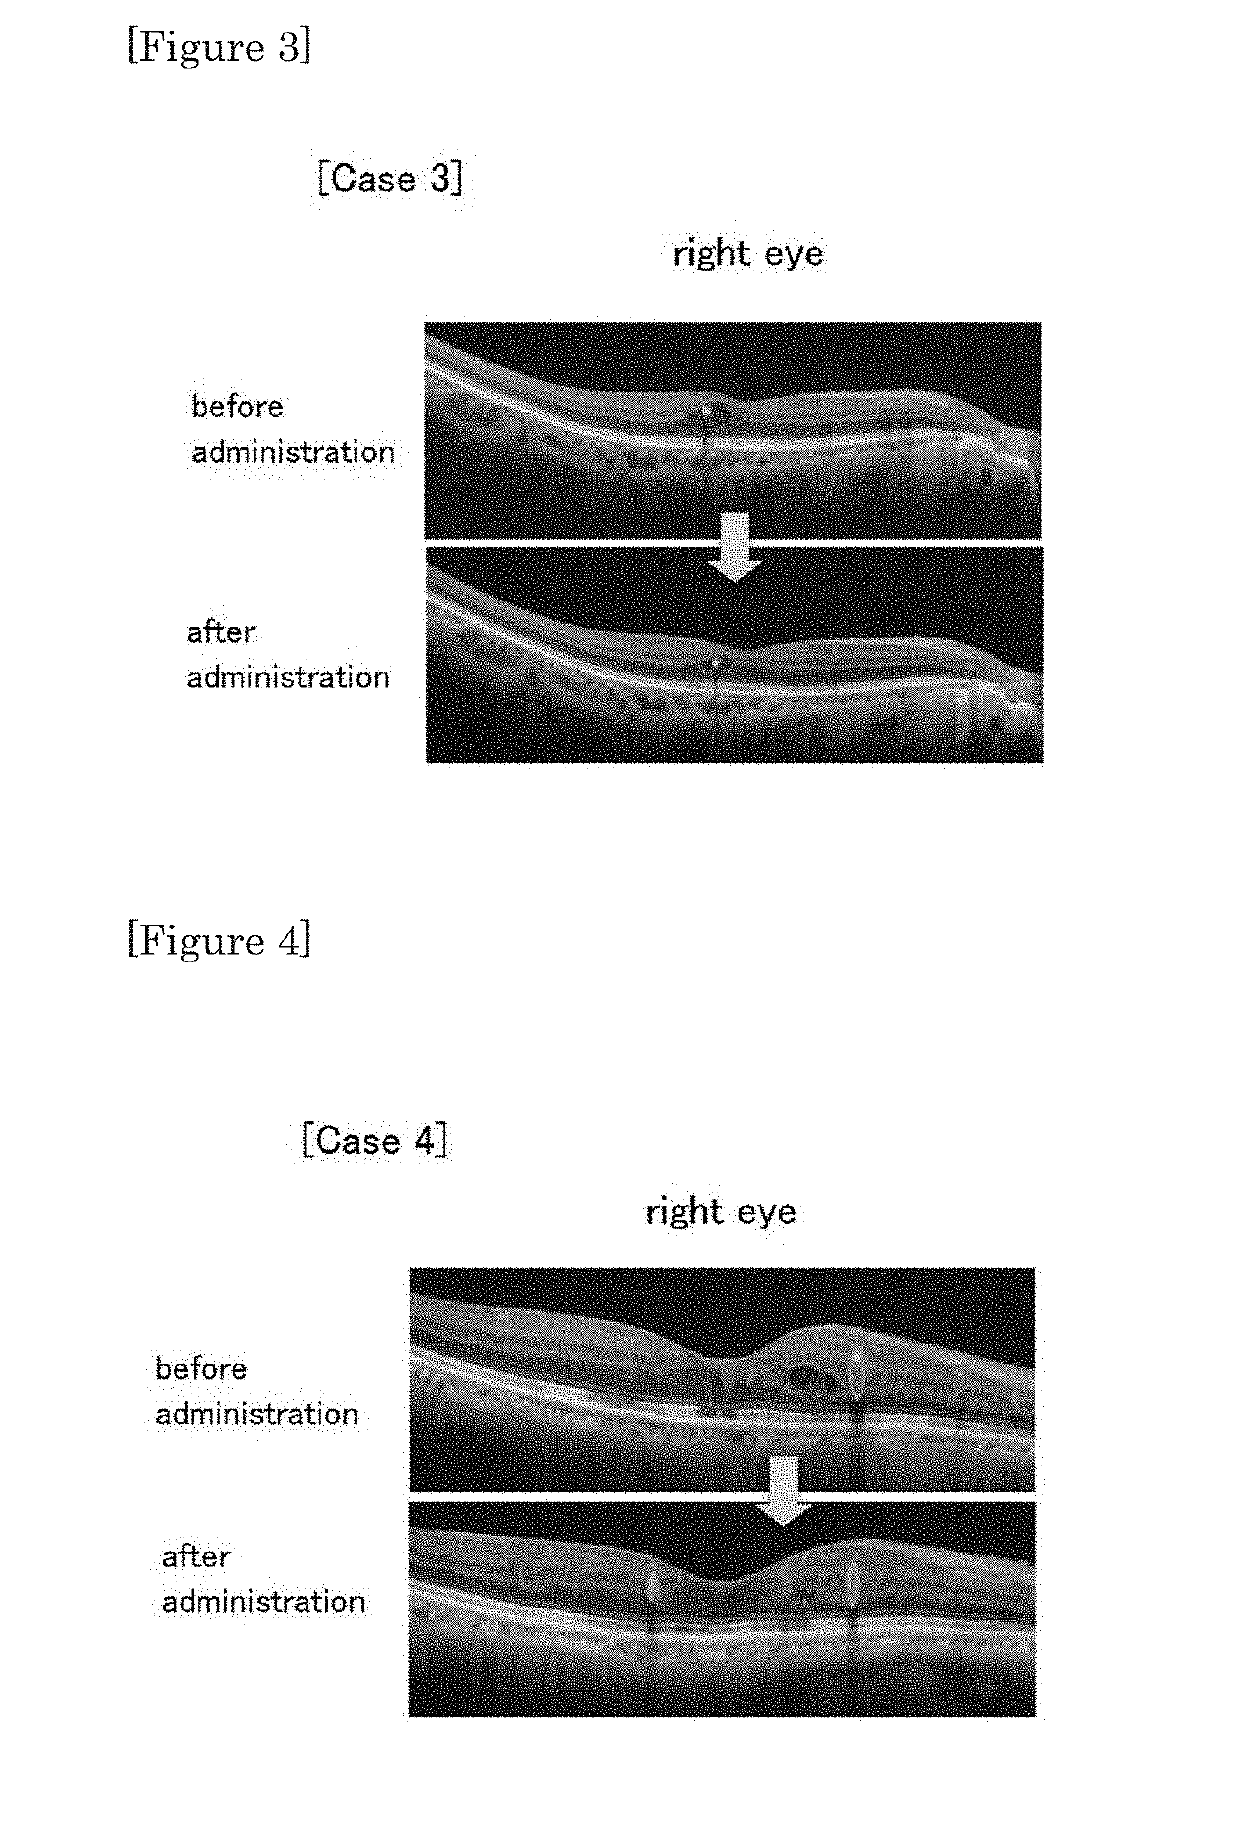 Agent for treating retinopathy